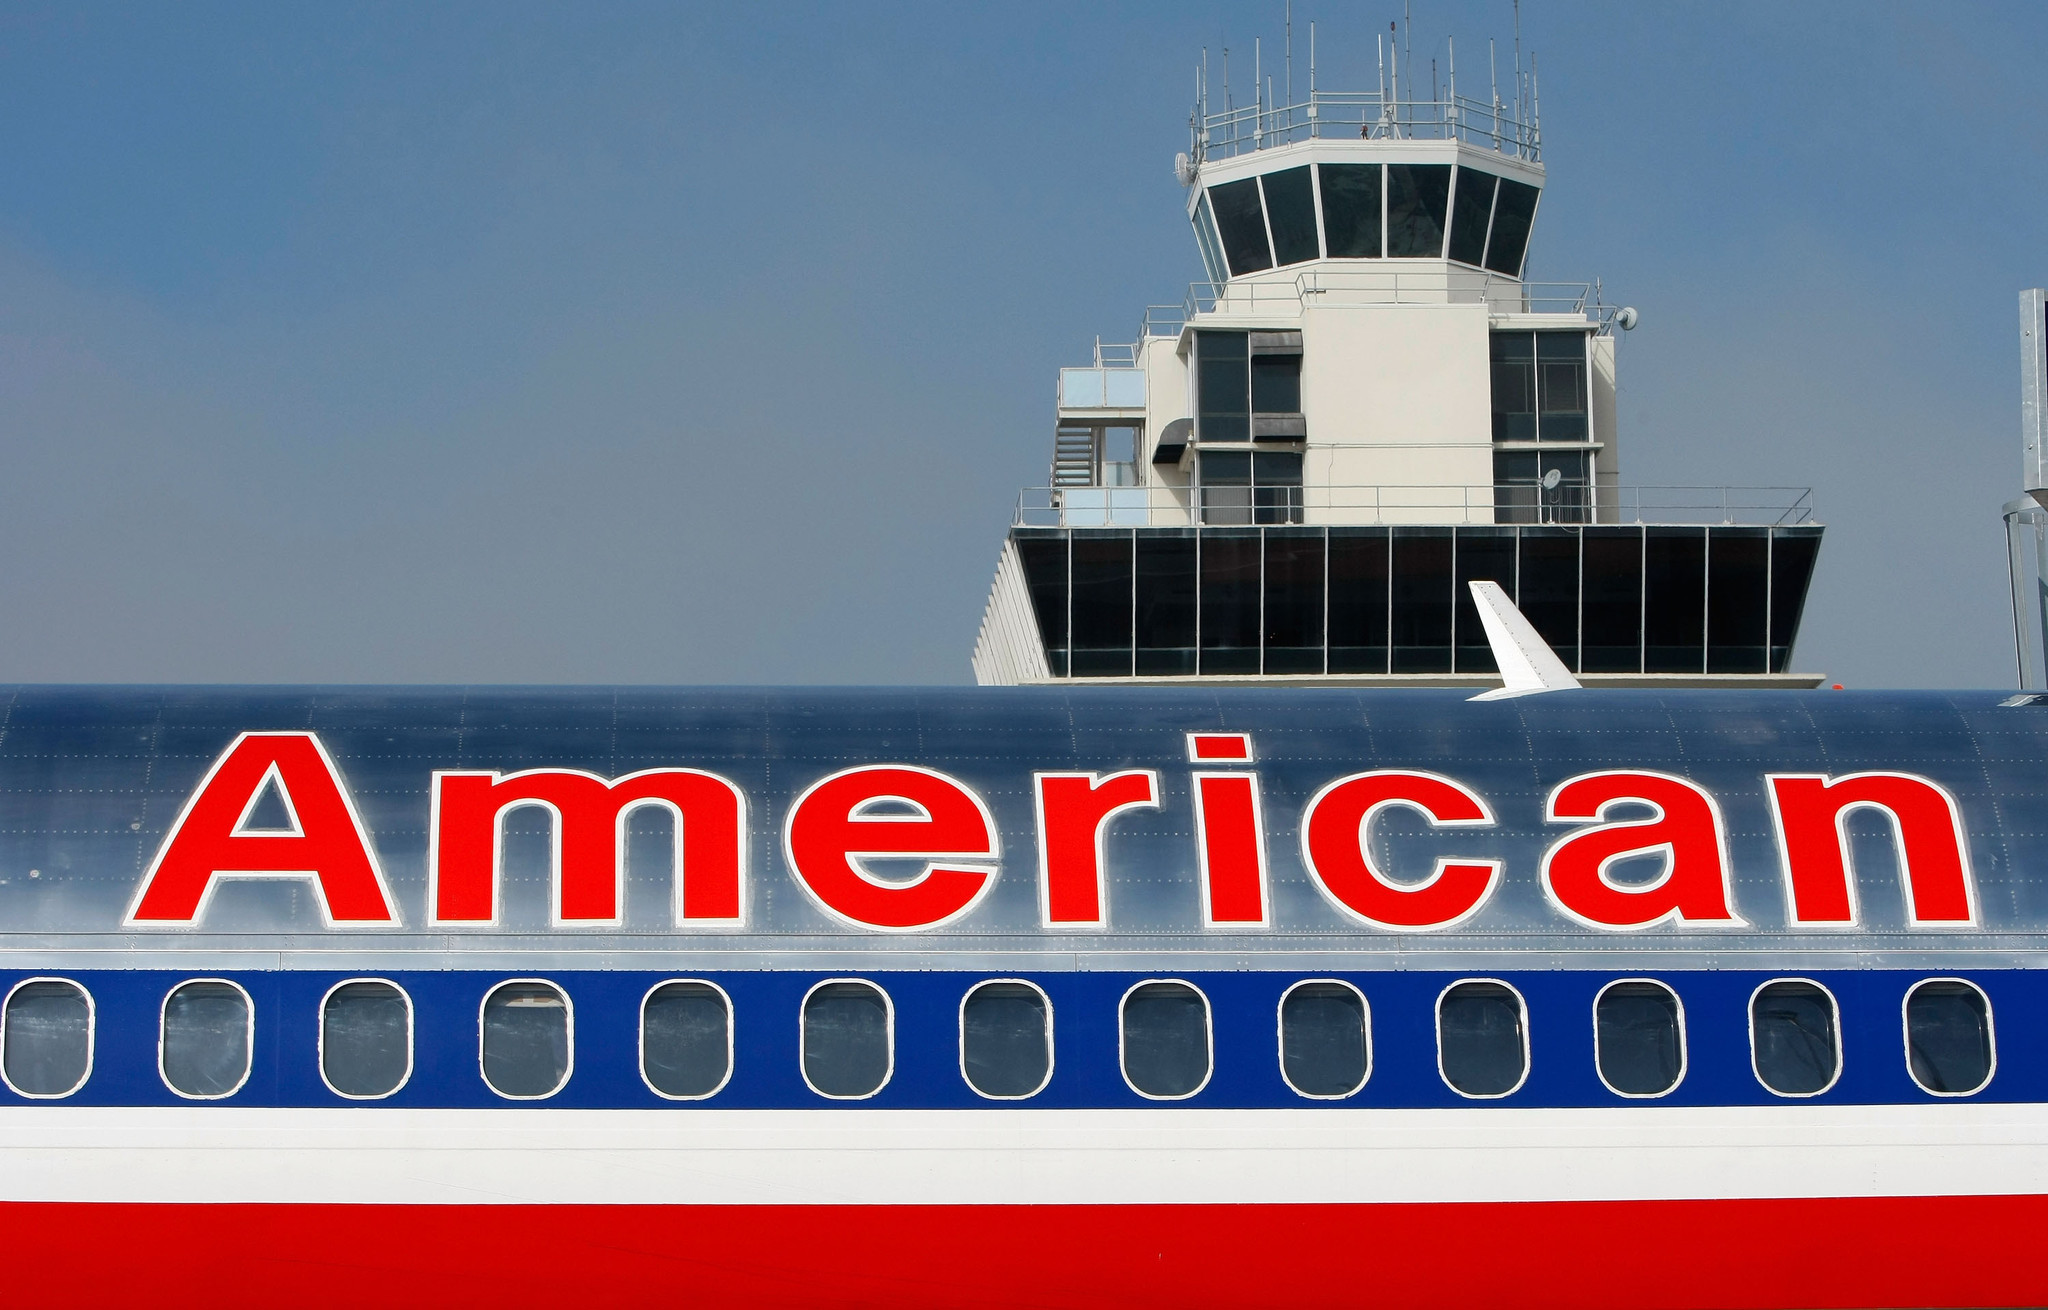 American Airlines promised vouchers but billed customer's card instead